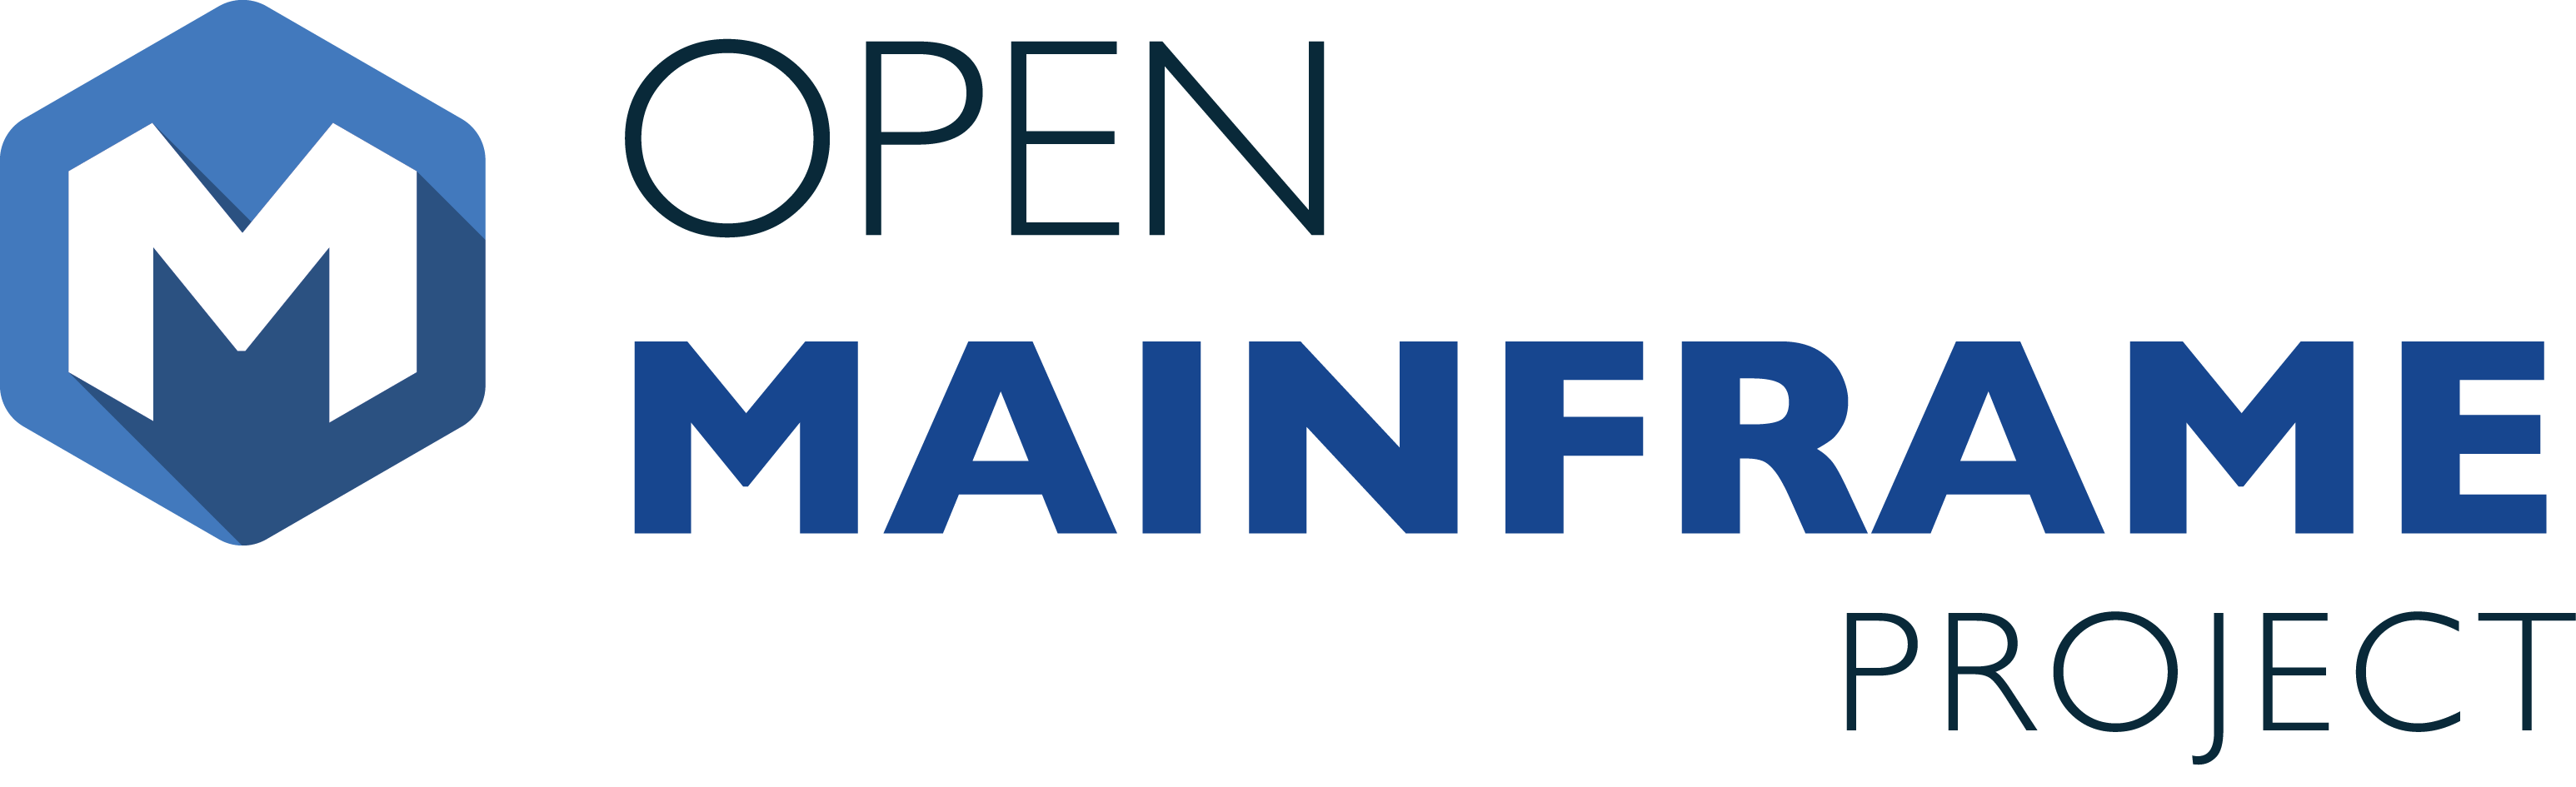 open mainframe project